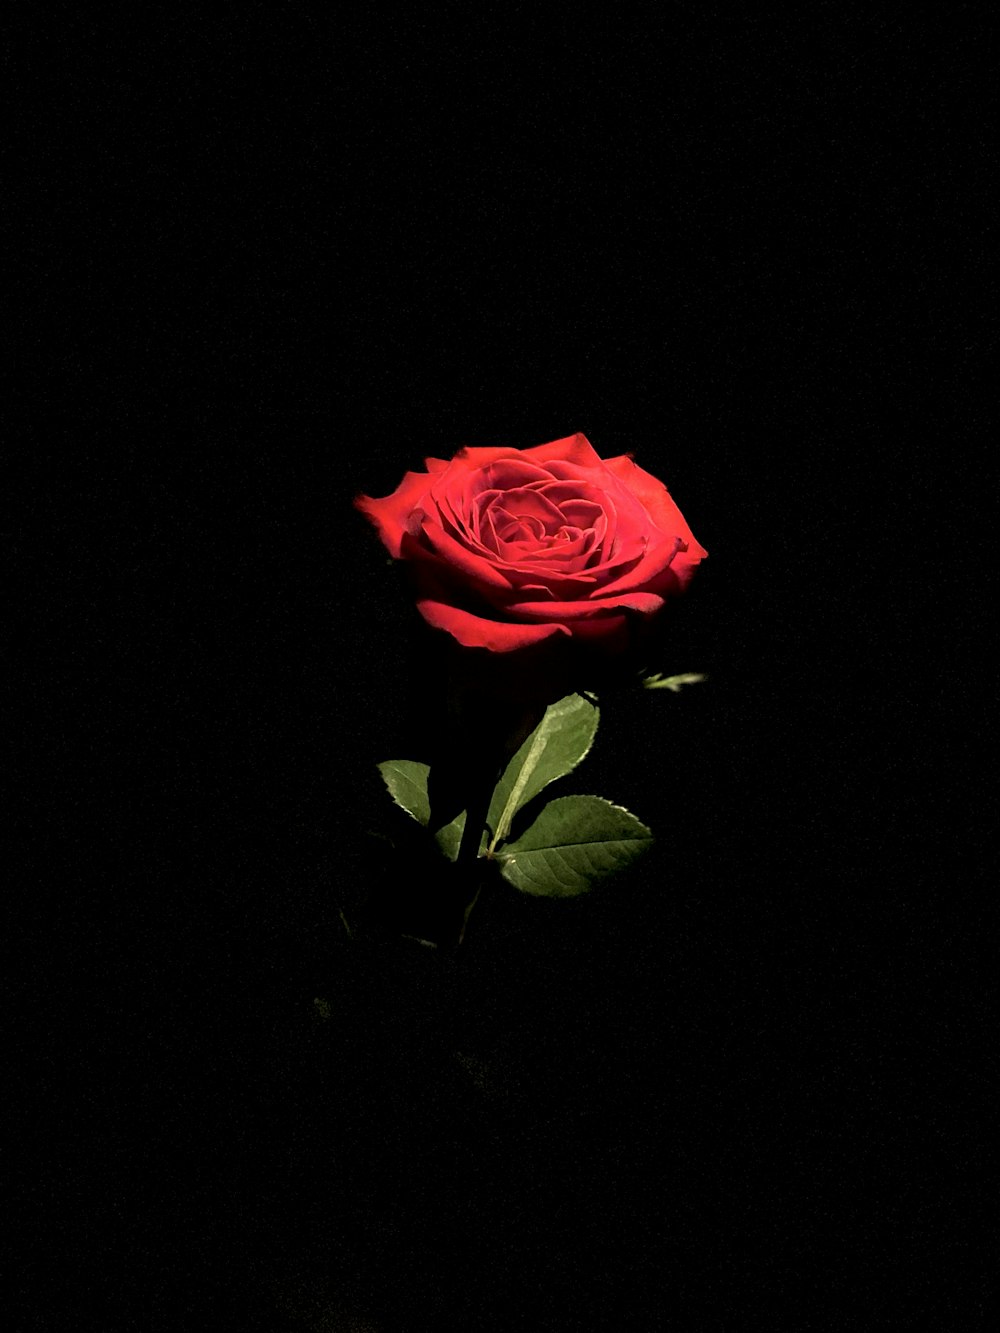 pink rose in bloom with black background